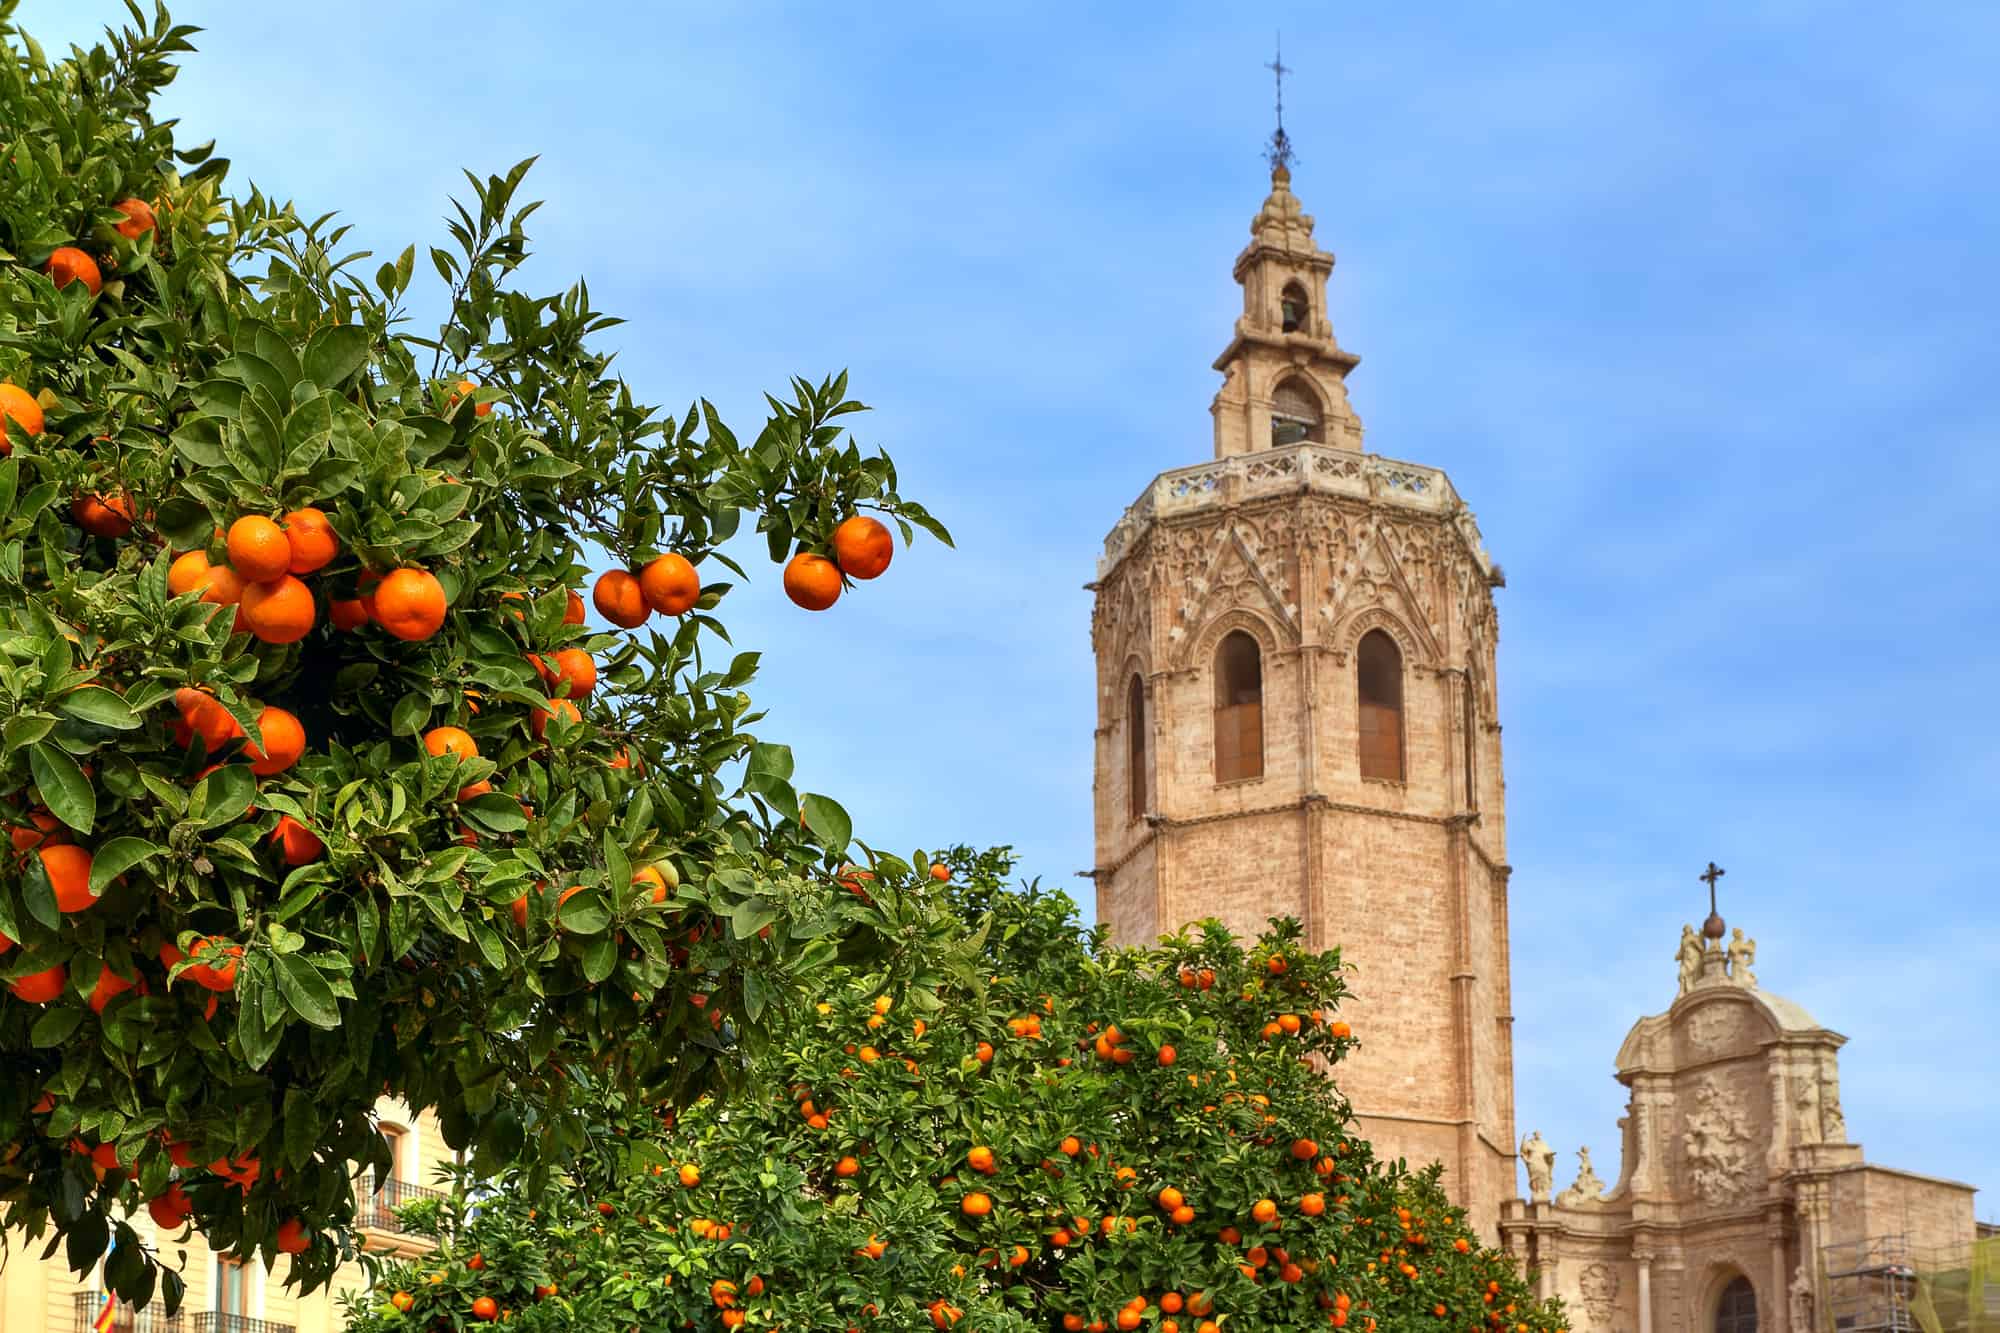 Trees with ripe oranges and the bell tower of the famous Saint Mary's Cathedral on the background under blue sky in Valencia, Spain.